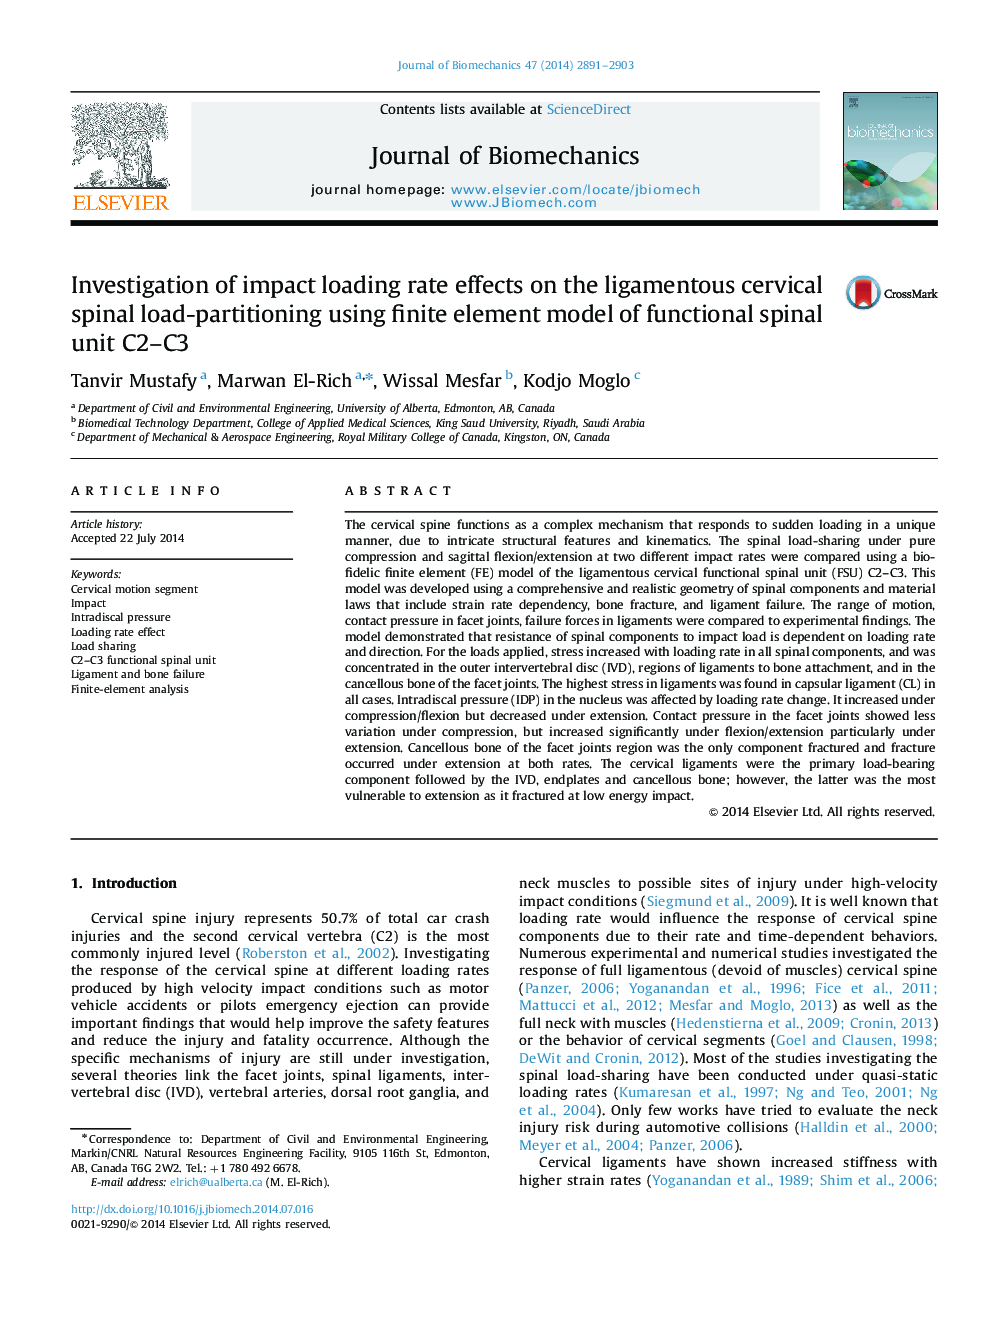 Investigation of impact loading rate effects on the ligamentous cervical spinal load-partitioning using finite element model of functional spinal unit C2-C3